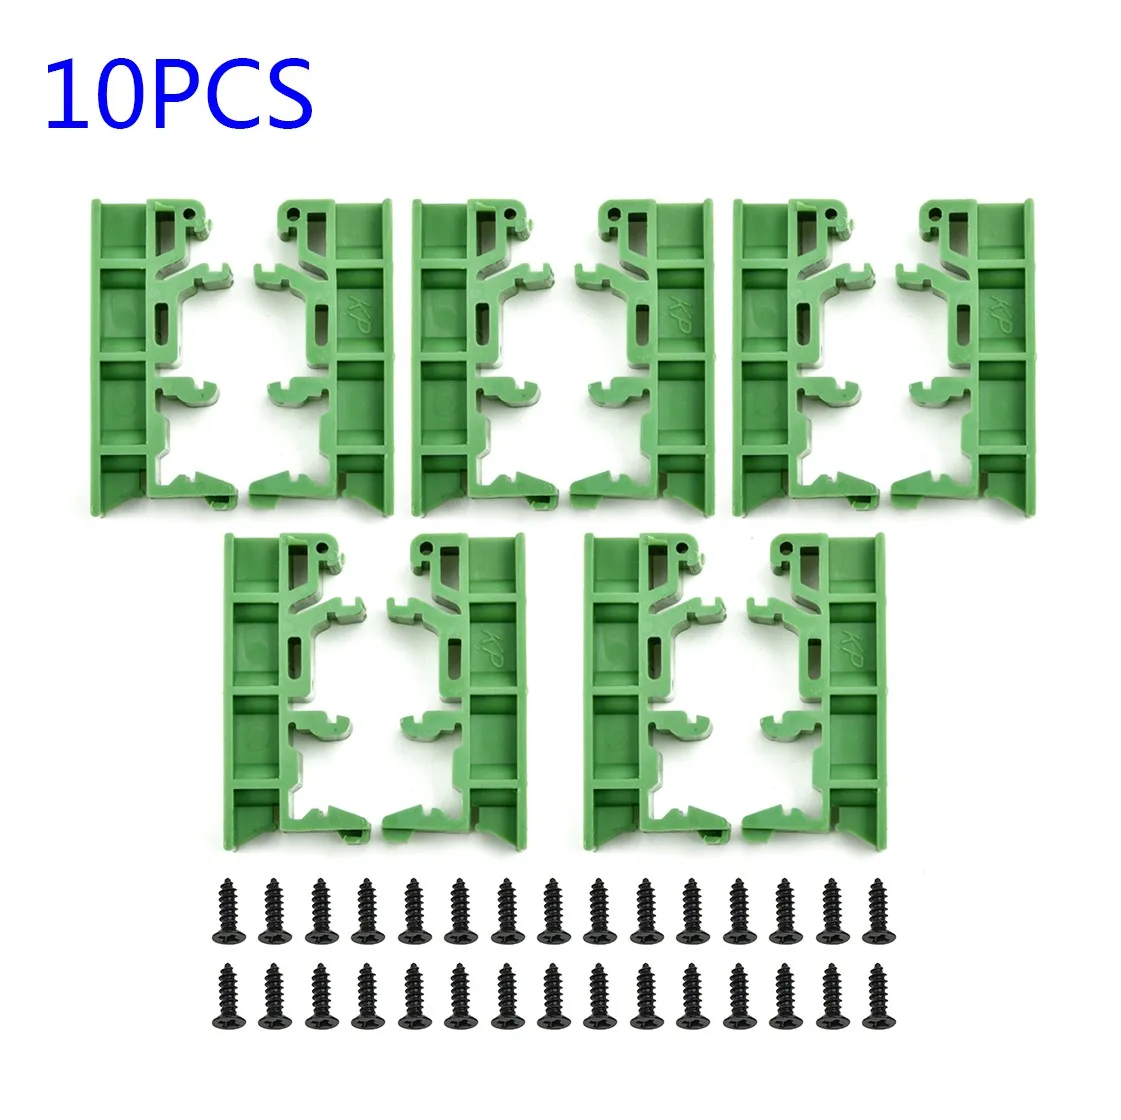 5 Set DRG-01 PCB DIN 35 Rail Adapter Circuit Board Mounting Bracket Mount Holder Electronic Components With Screws